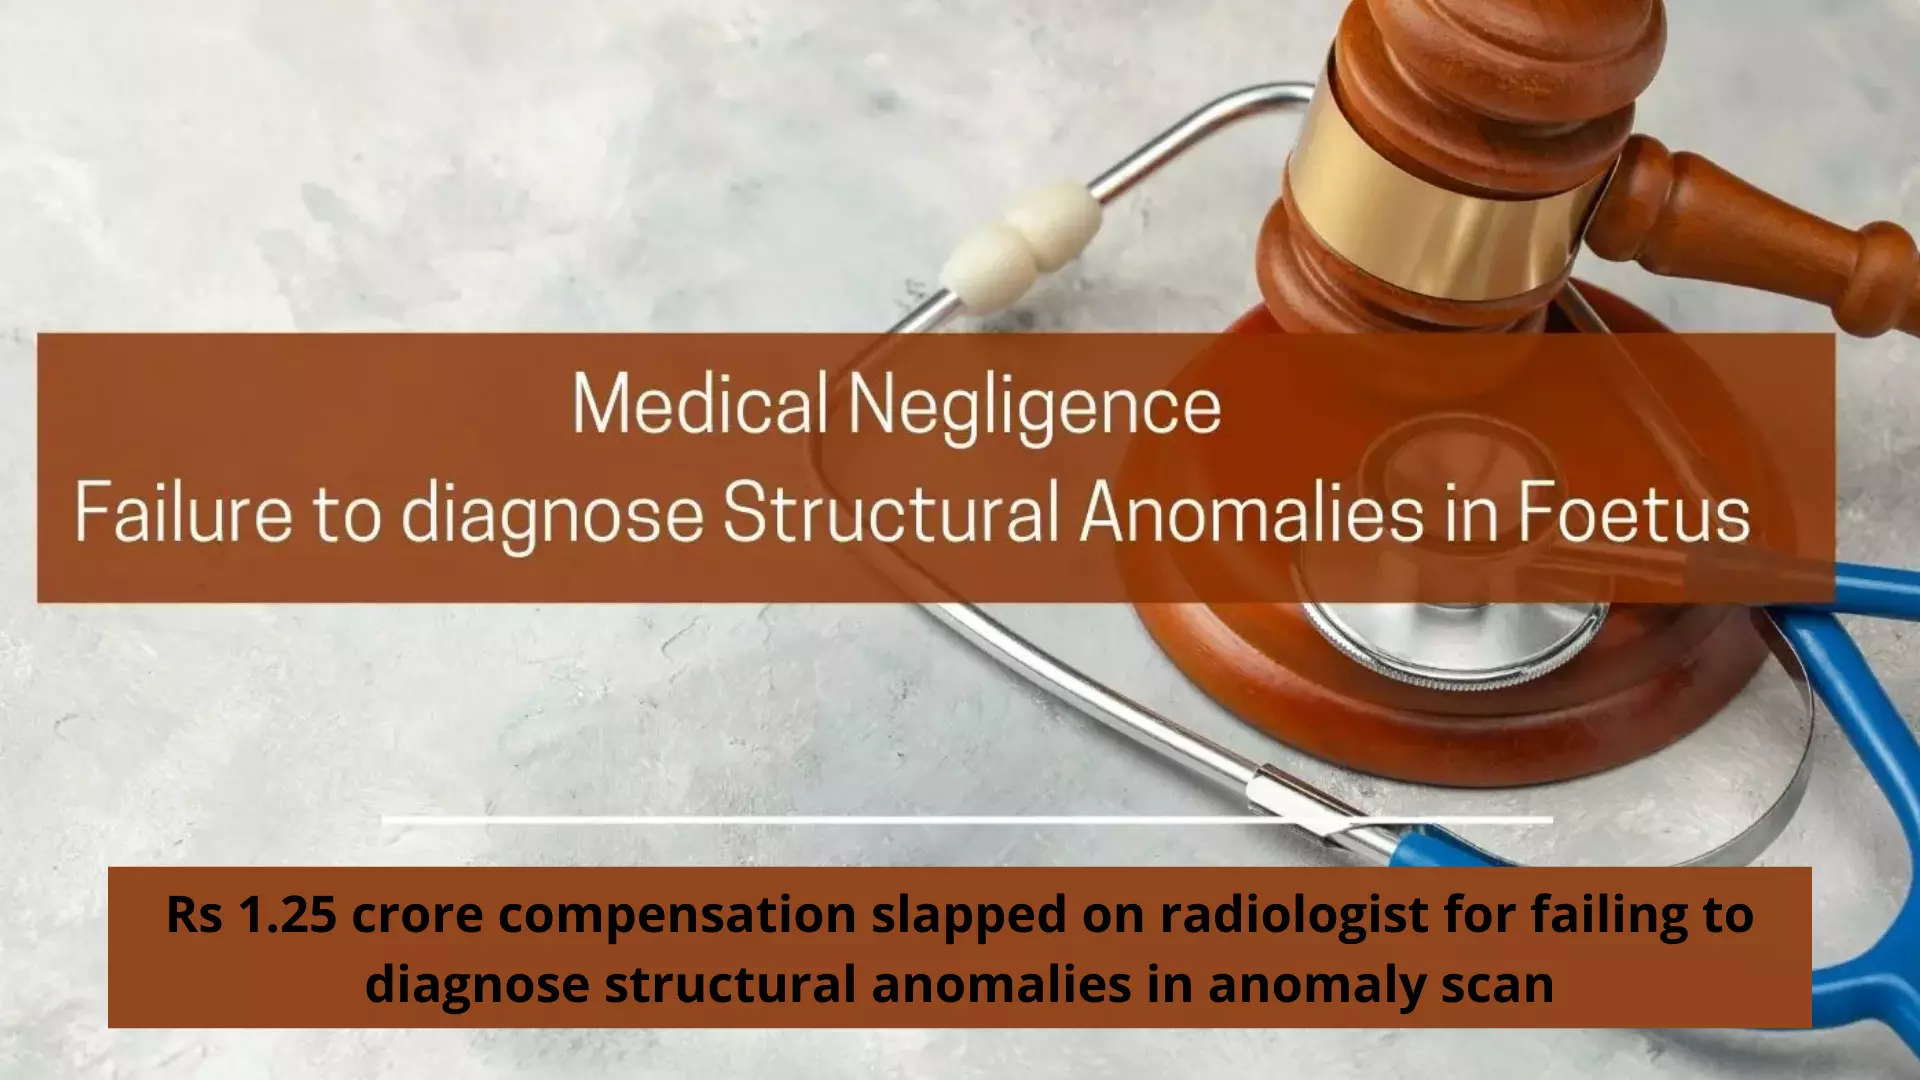 Rs 1.25 crore compensation slapped on radiologist for failing to diagnose structural anomalies in anomaly scan